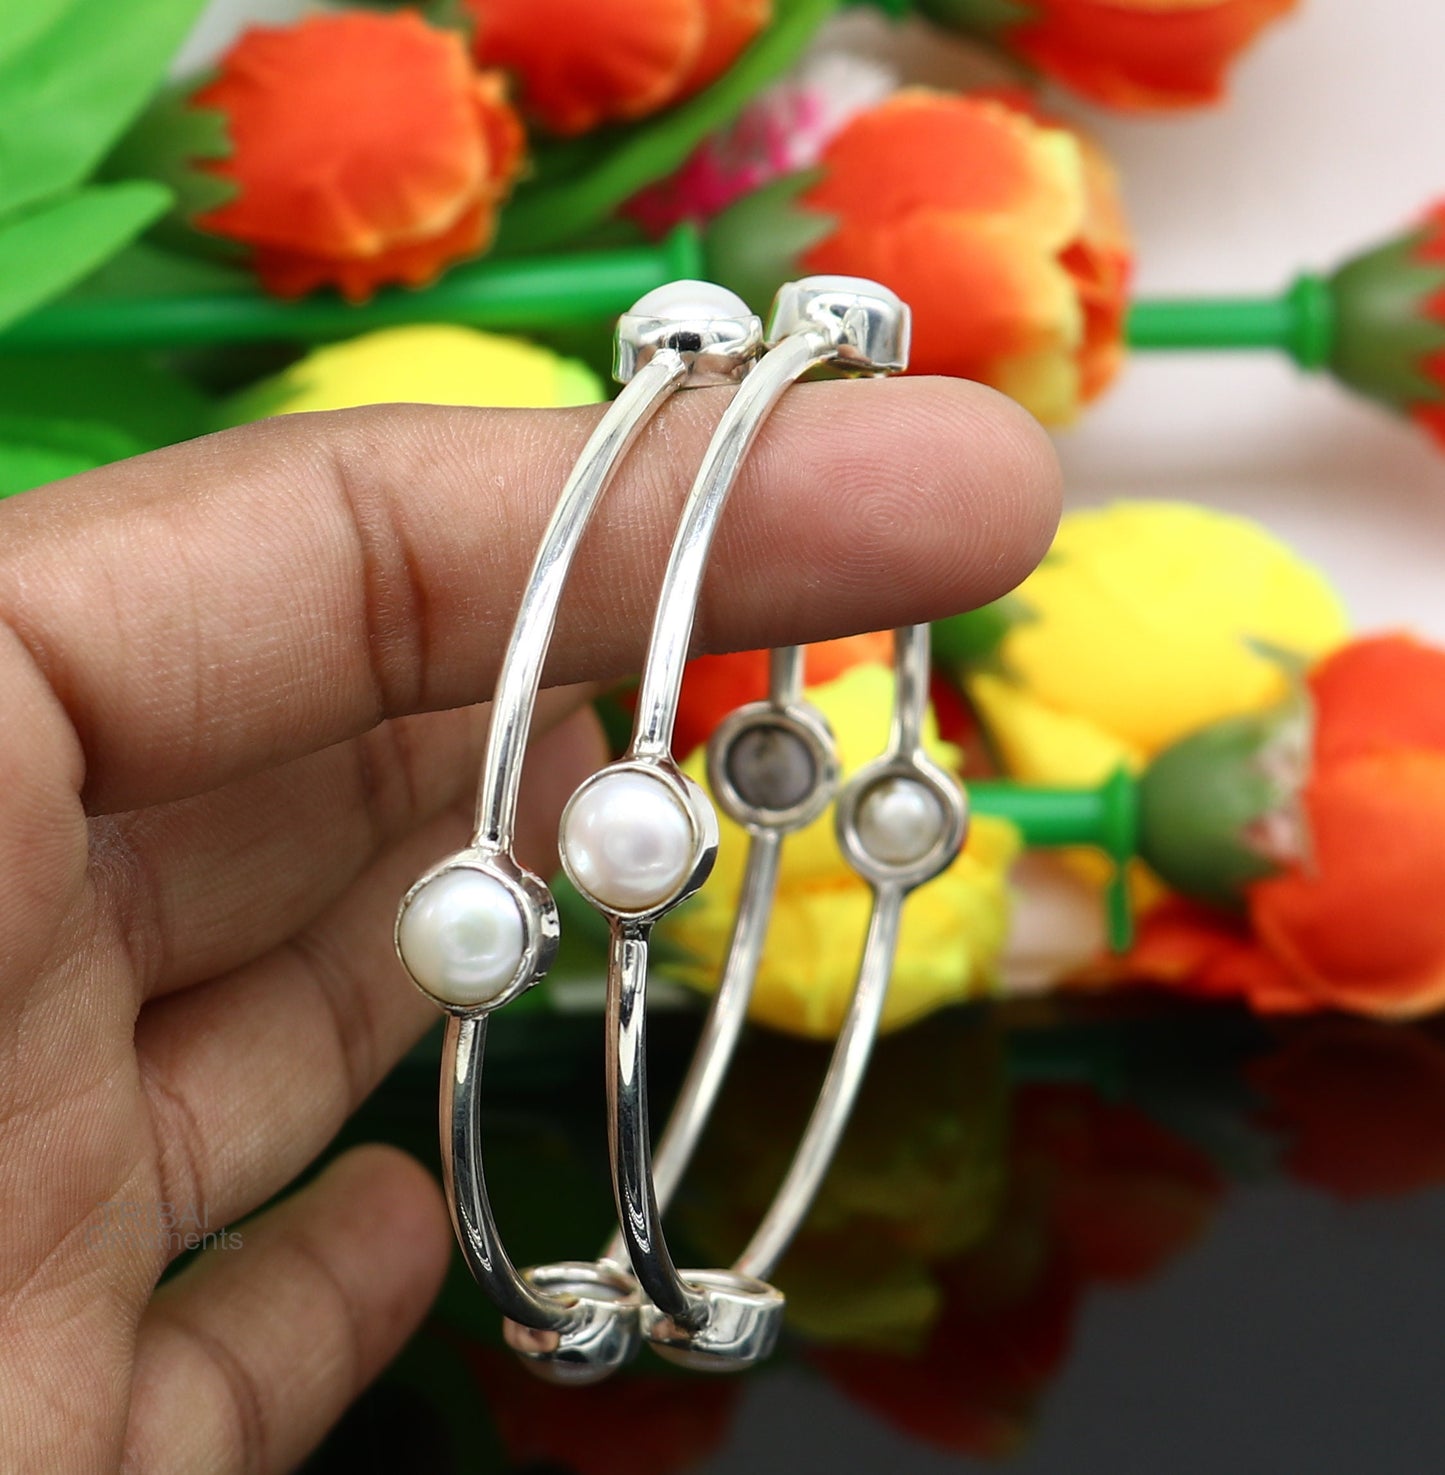 925 sterling silver plain bangle bracelet with gorgeous natural pearl stone floral design bangles, best brides or girl's jewelry ba128 - TRIBAL ORNAMENTS